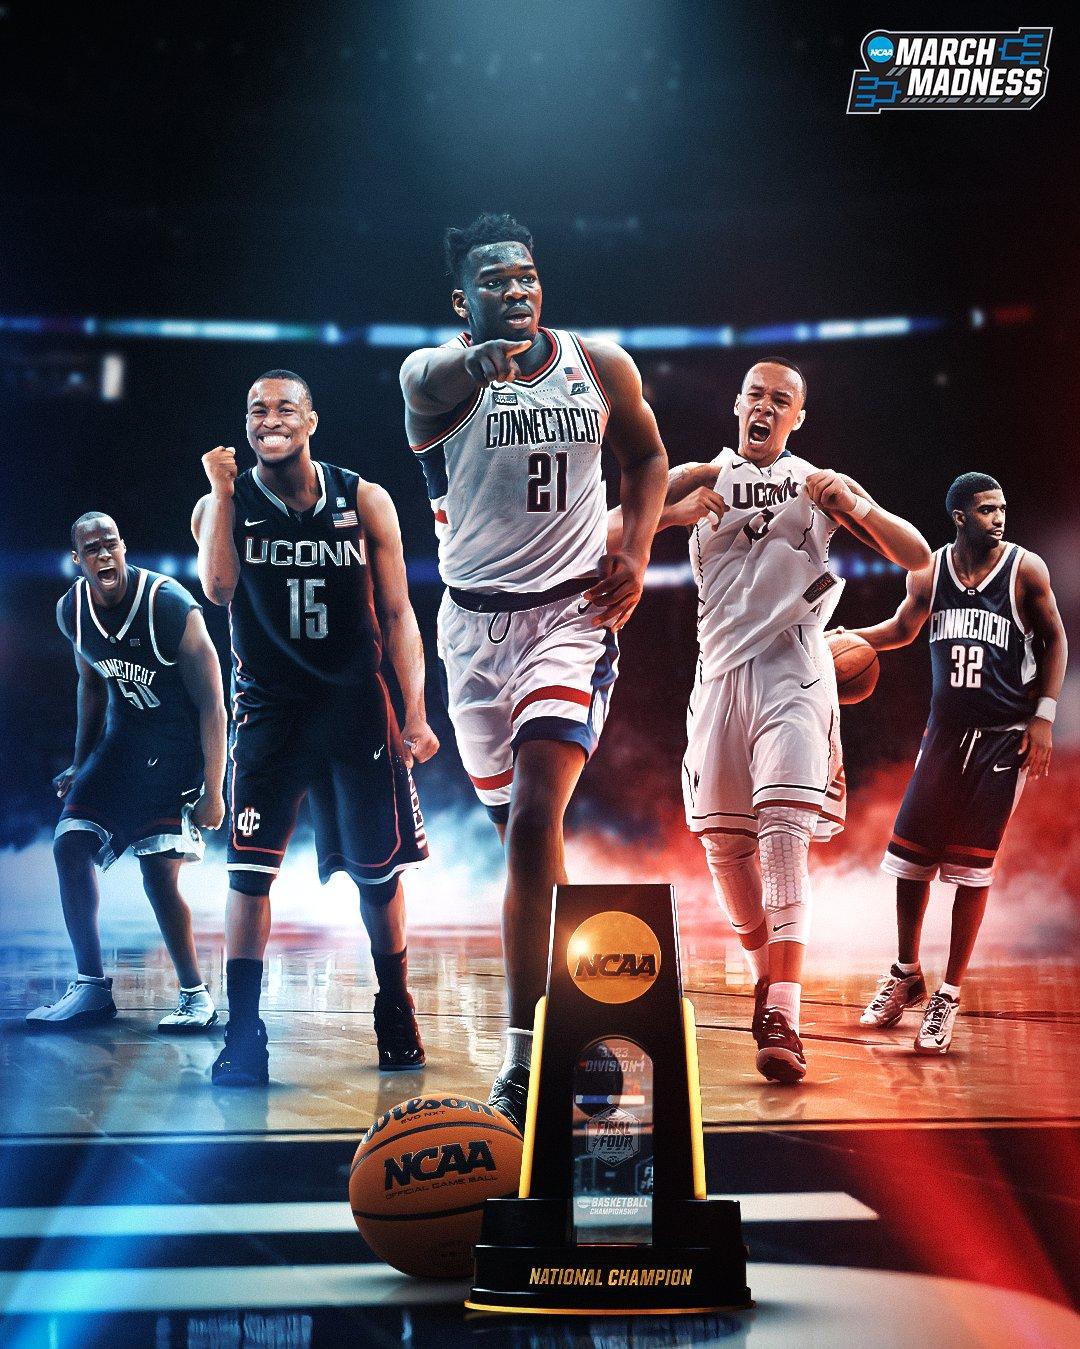 Ncaa March Madness On Uconn Huskies Time National